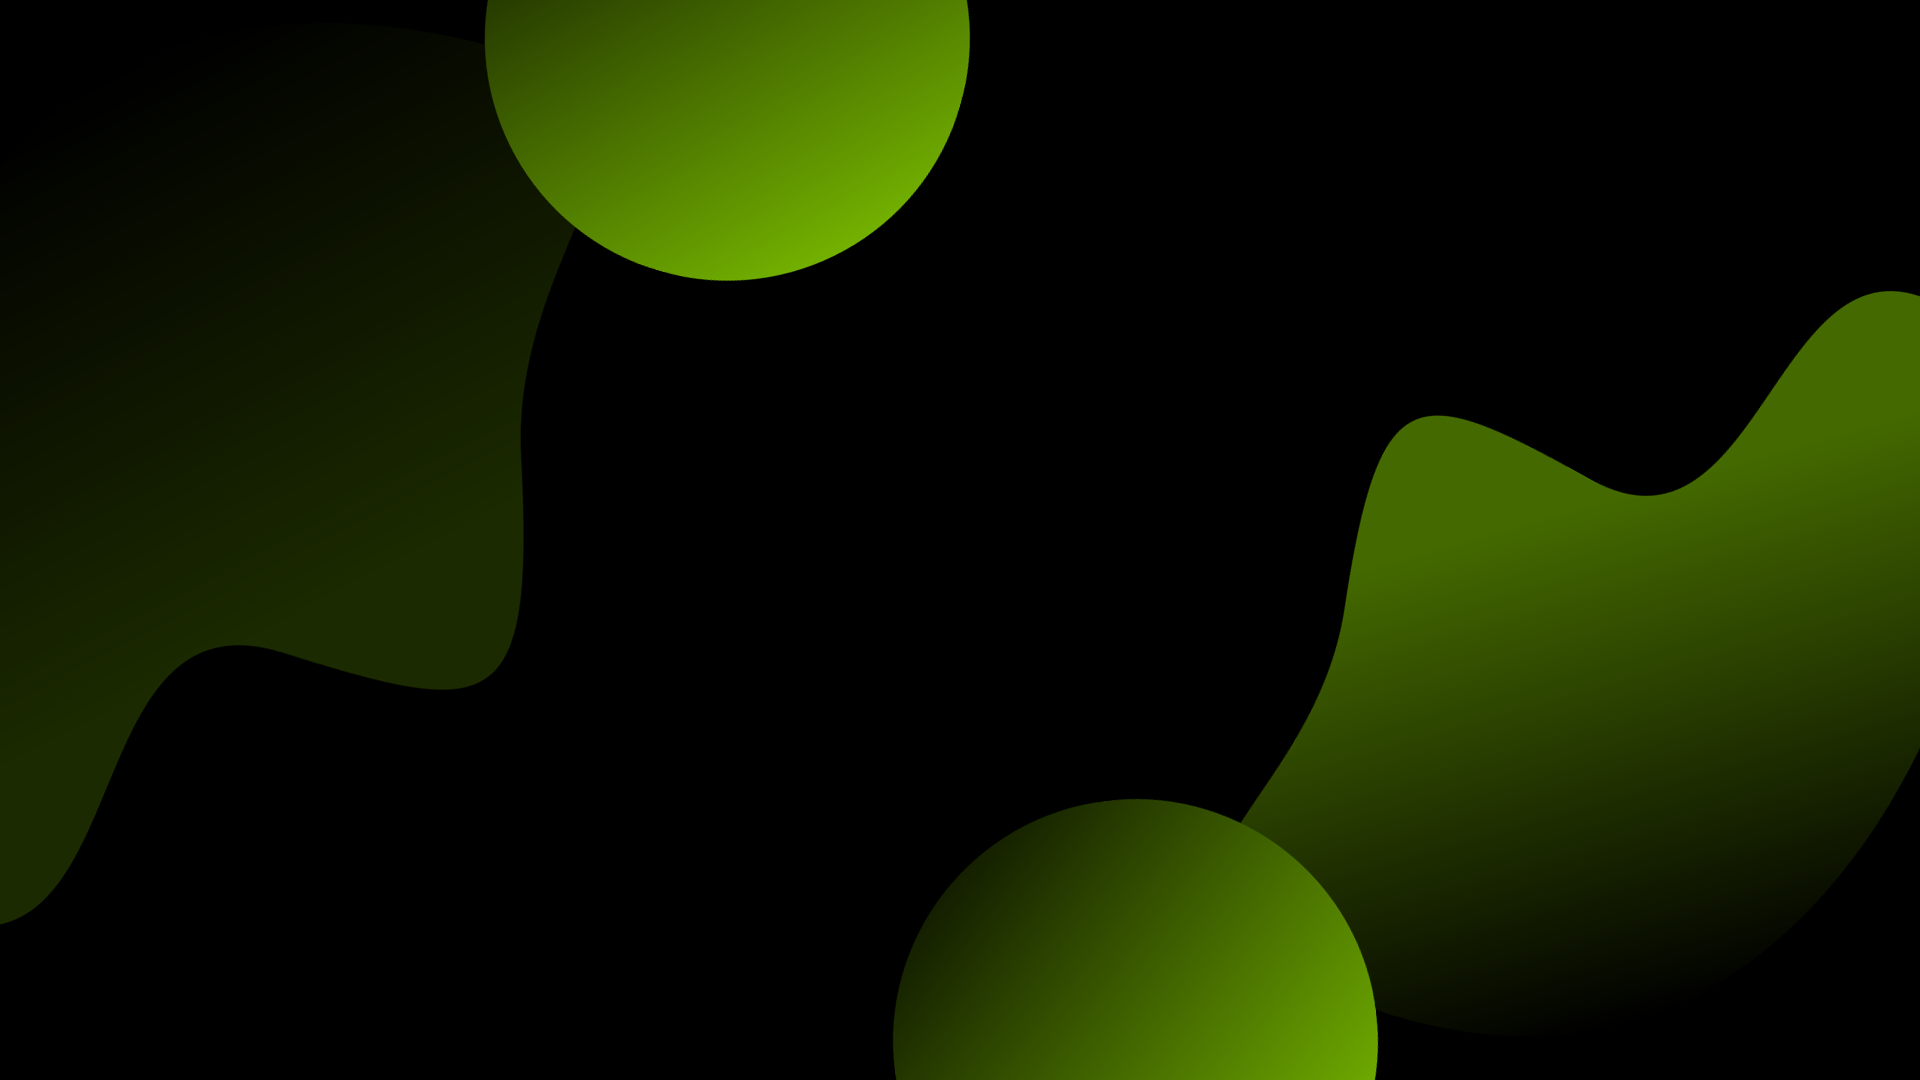 Material Minimal Shapes Light Green Minimalism Simple Background 1920x1080